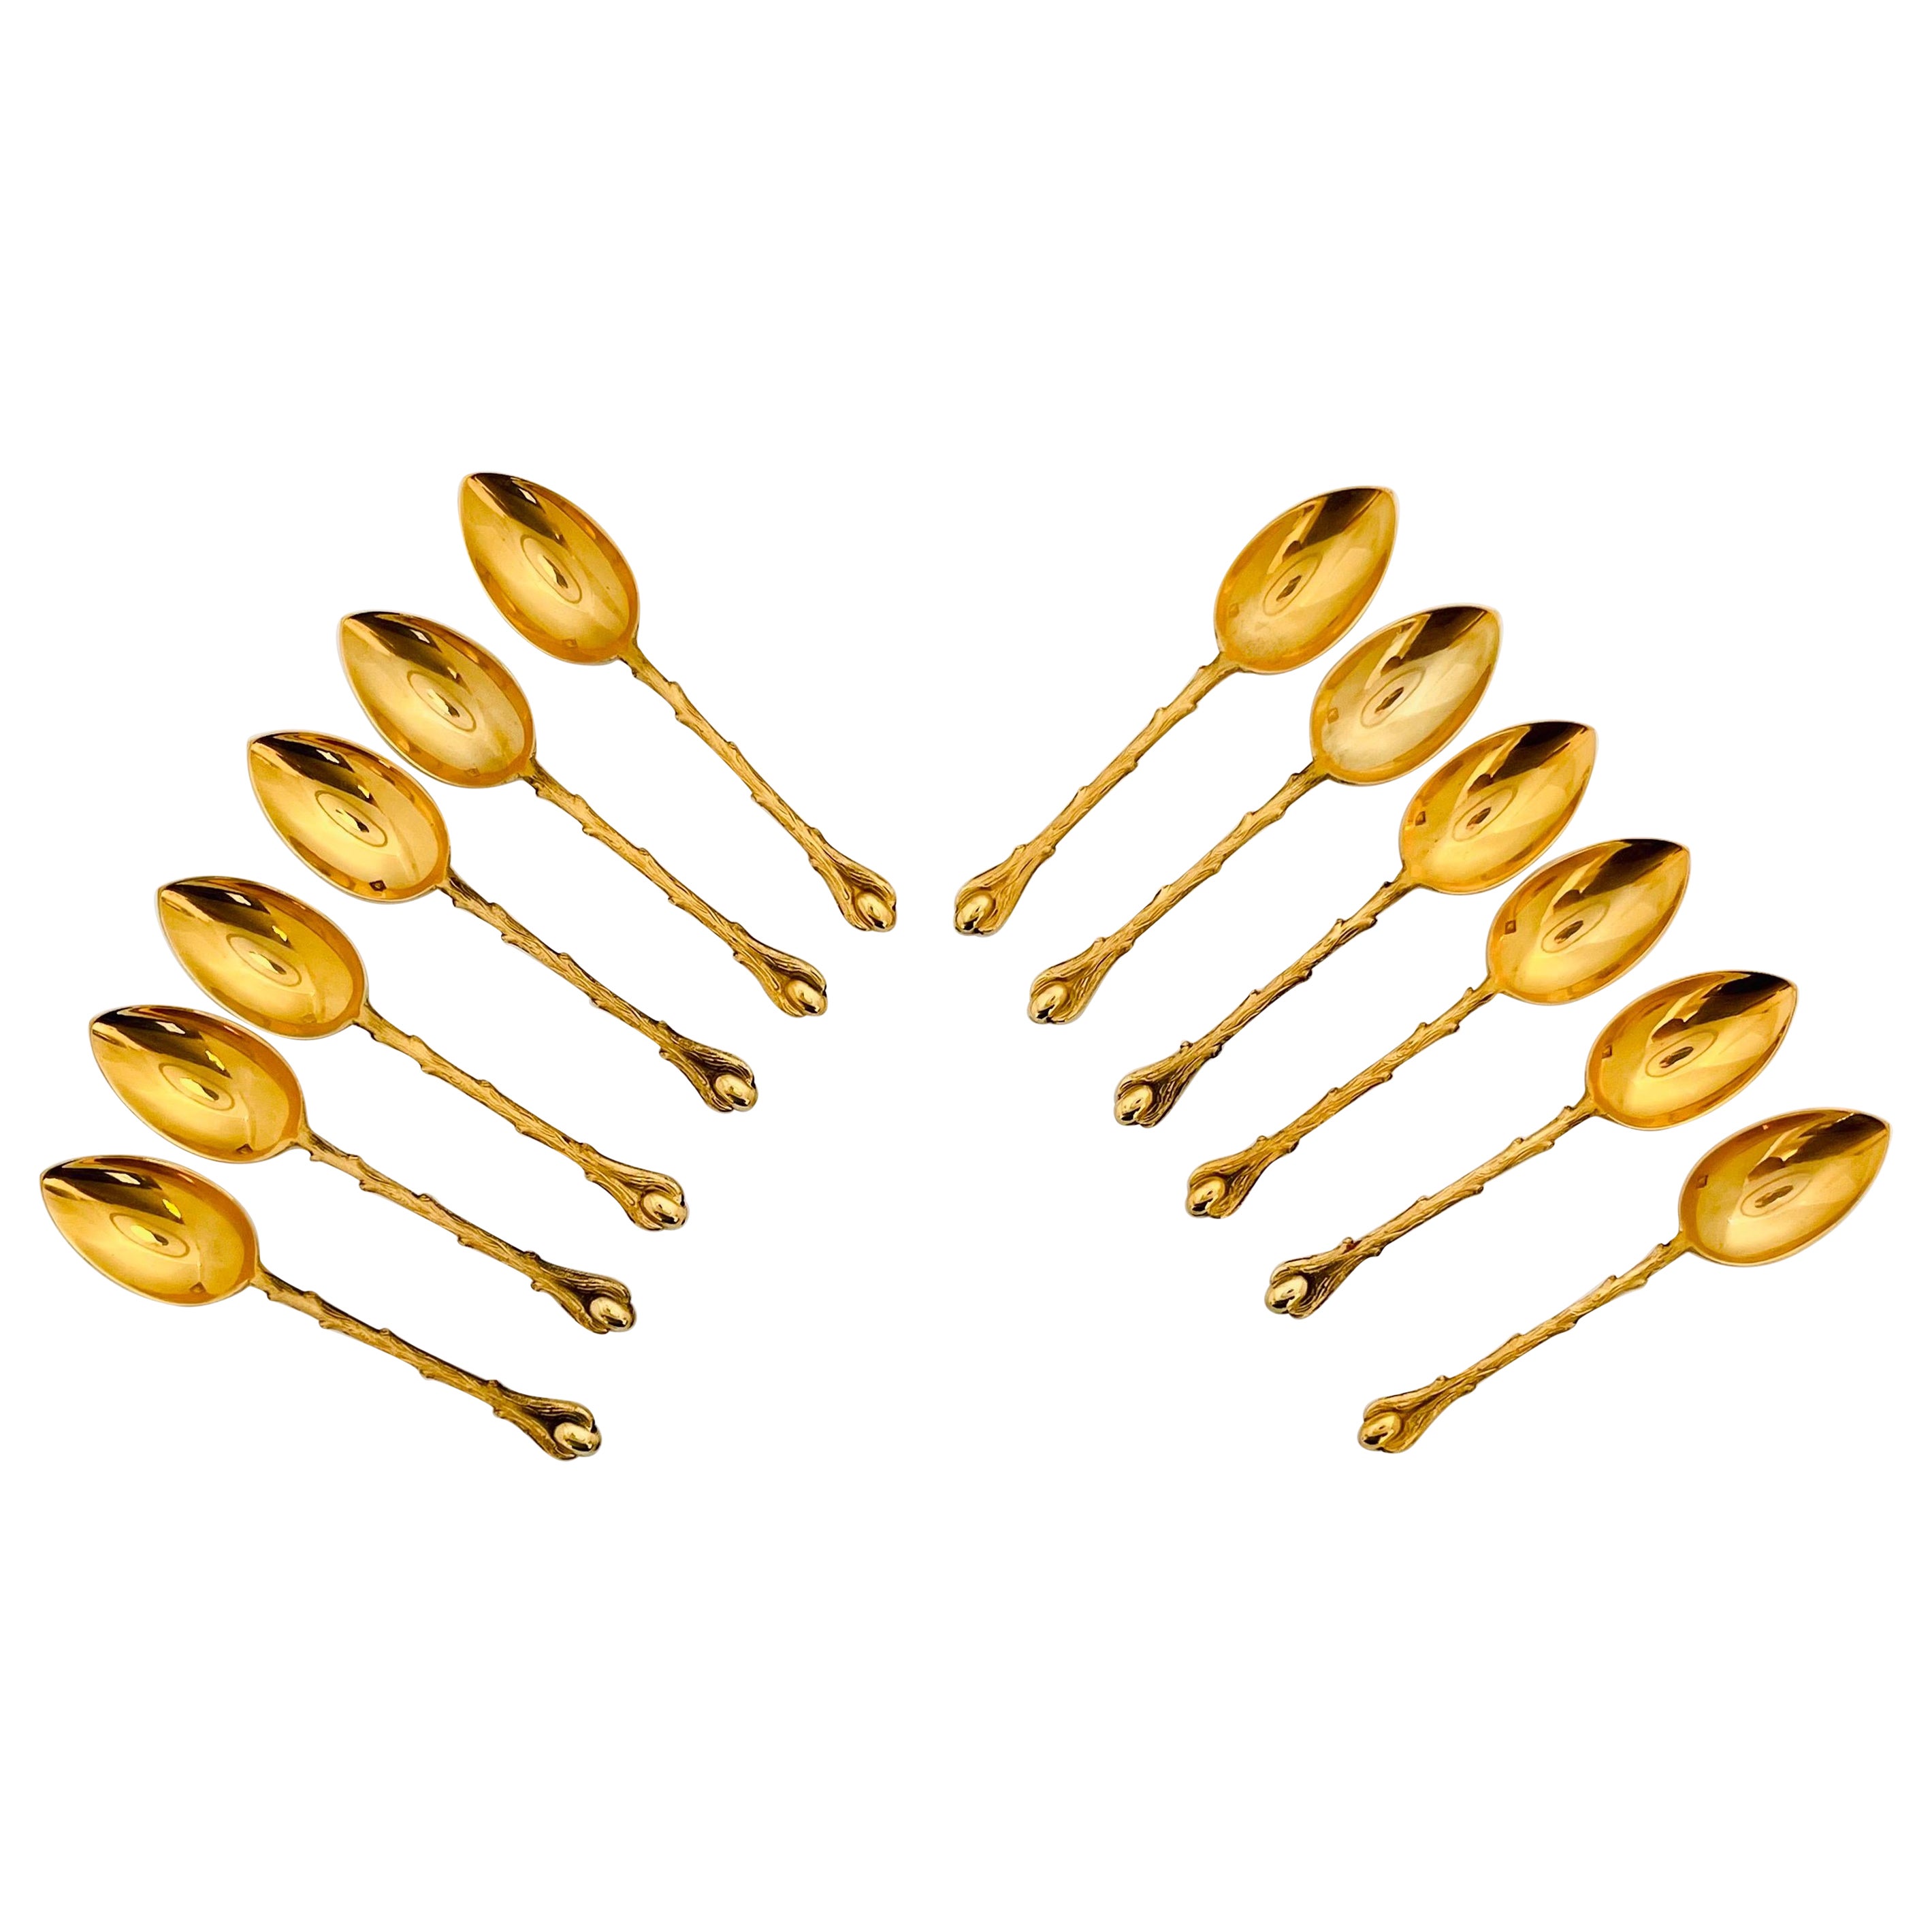  Teaspoons 12 Items gold covered by Saint Medard France 1950 For Sale